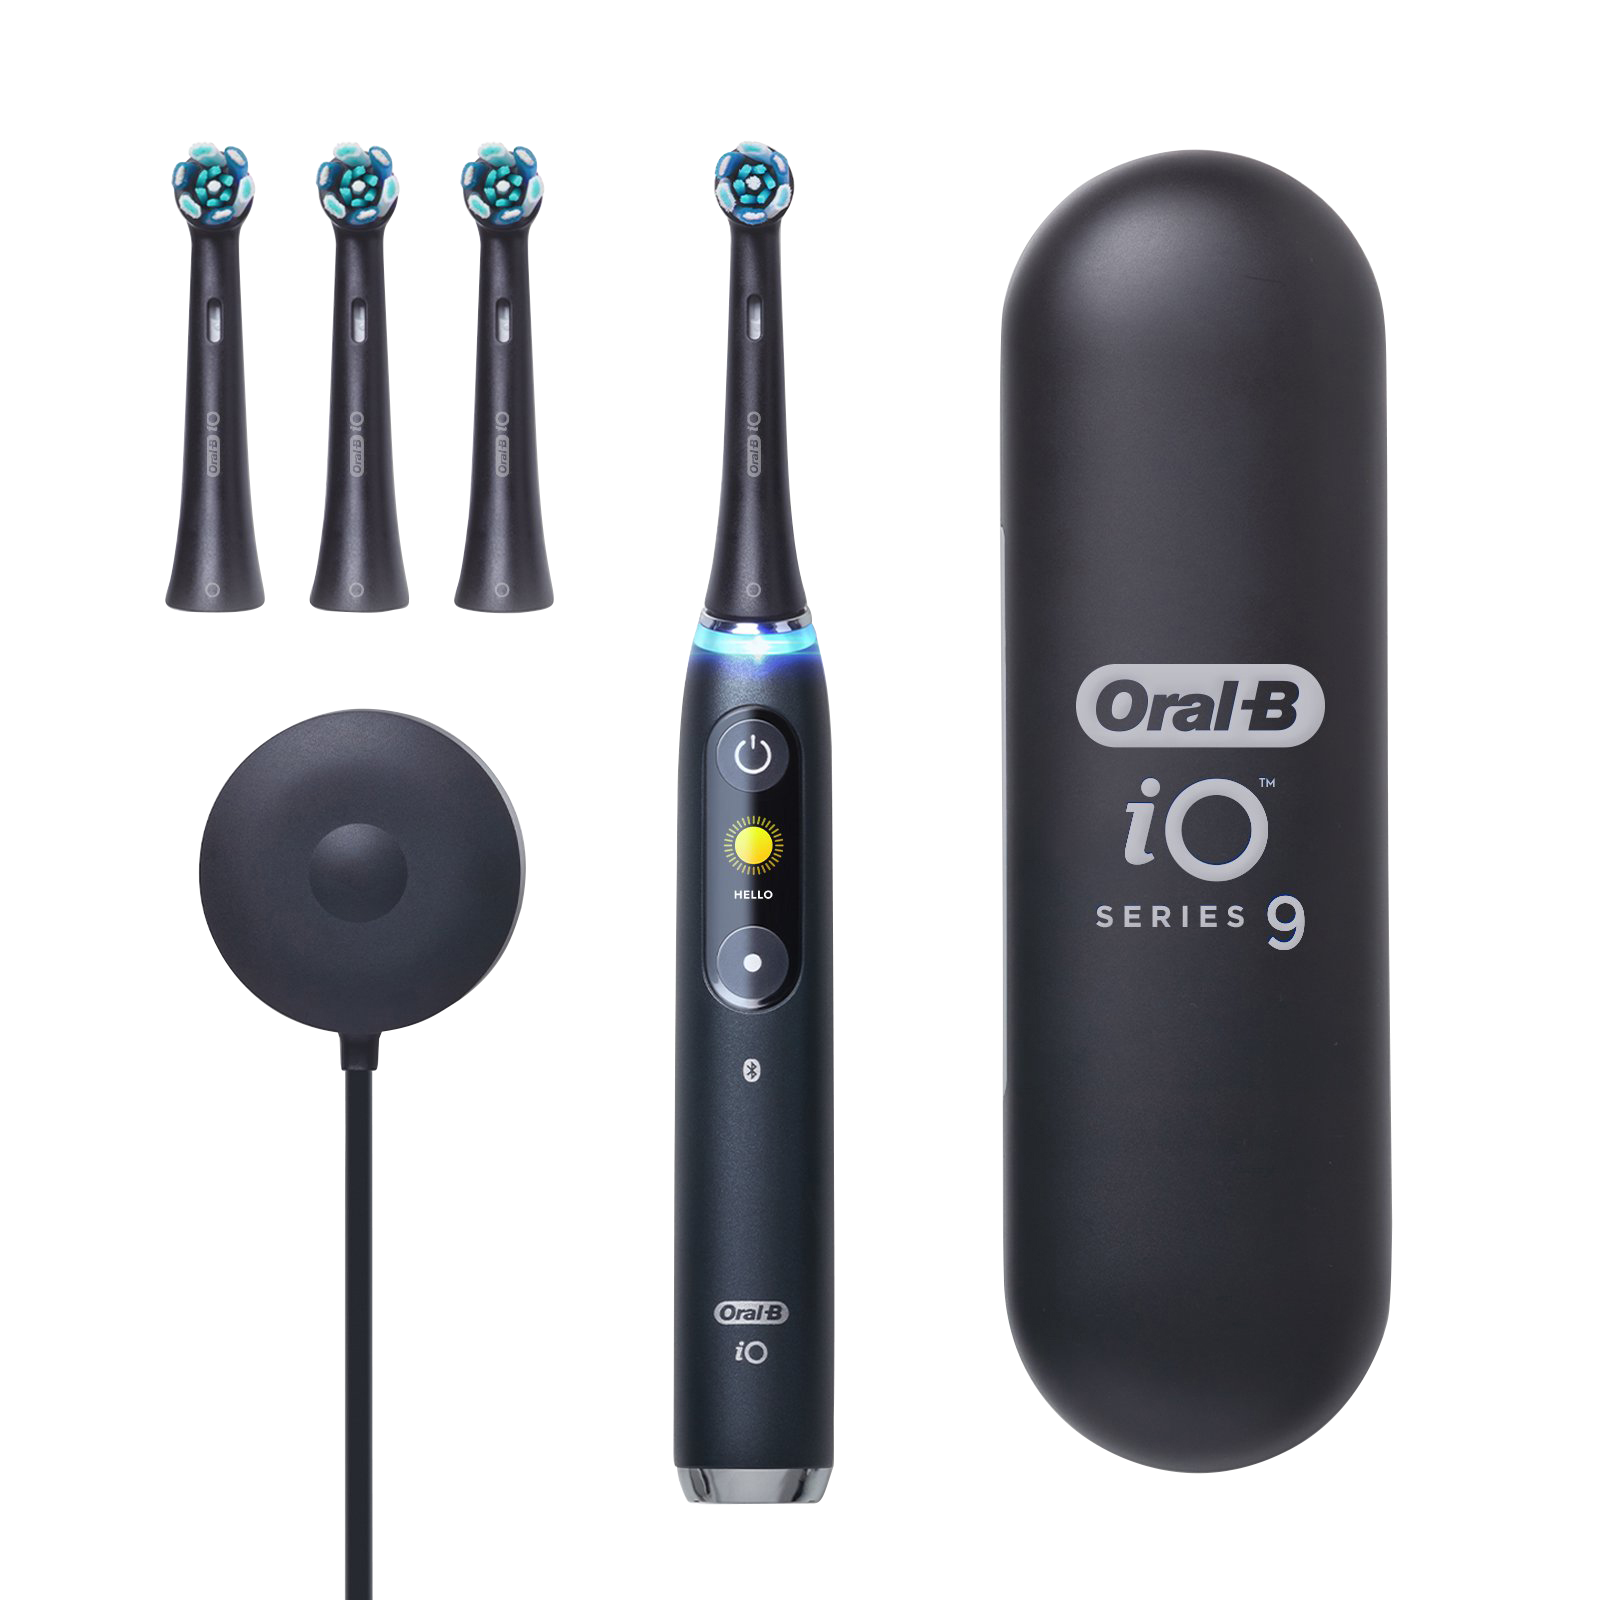 Oral-B iO Series 9 rechargeable toothbrush case brush plugs and charger